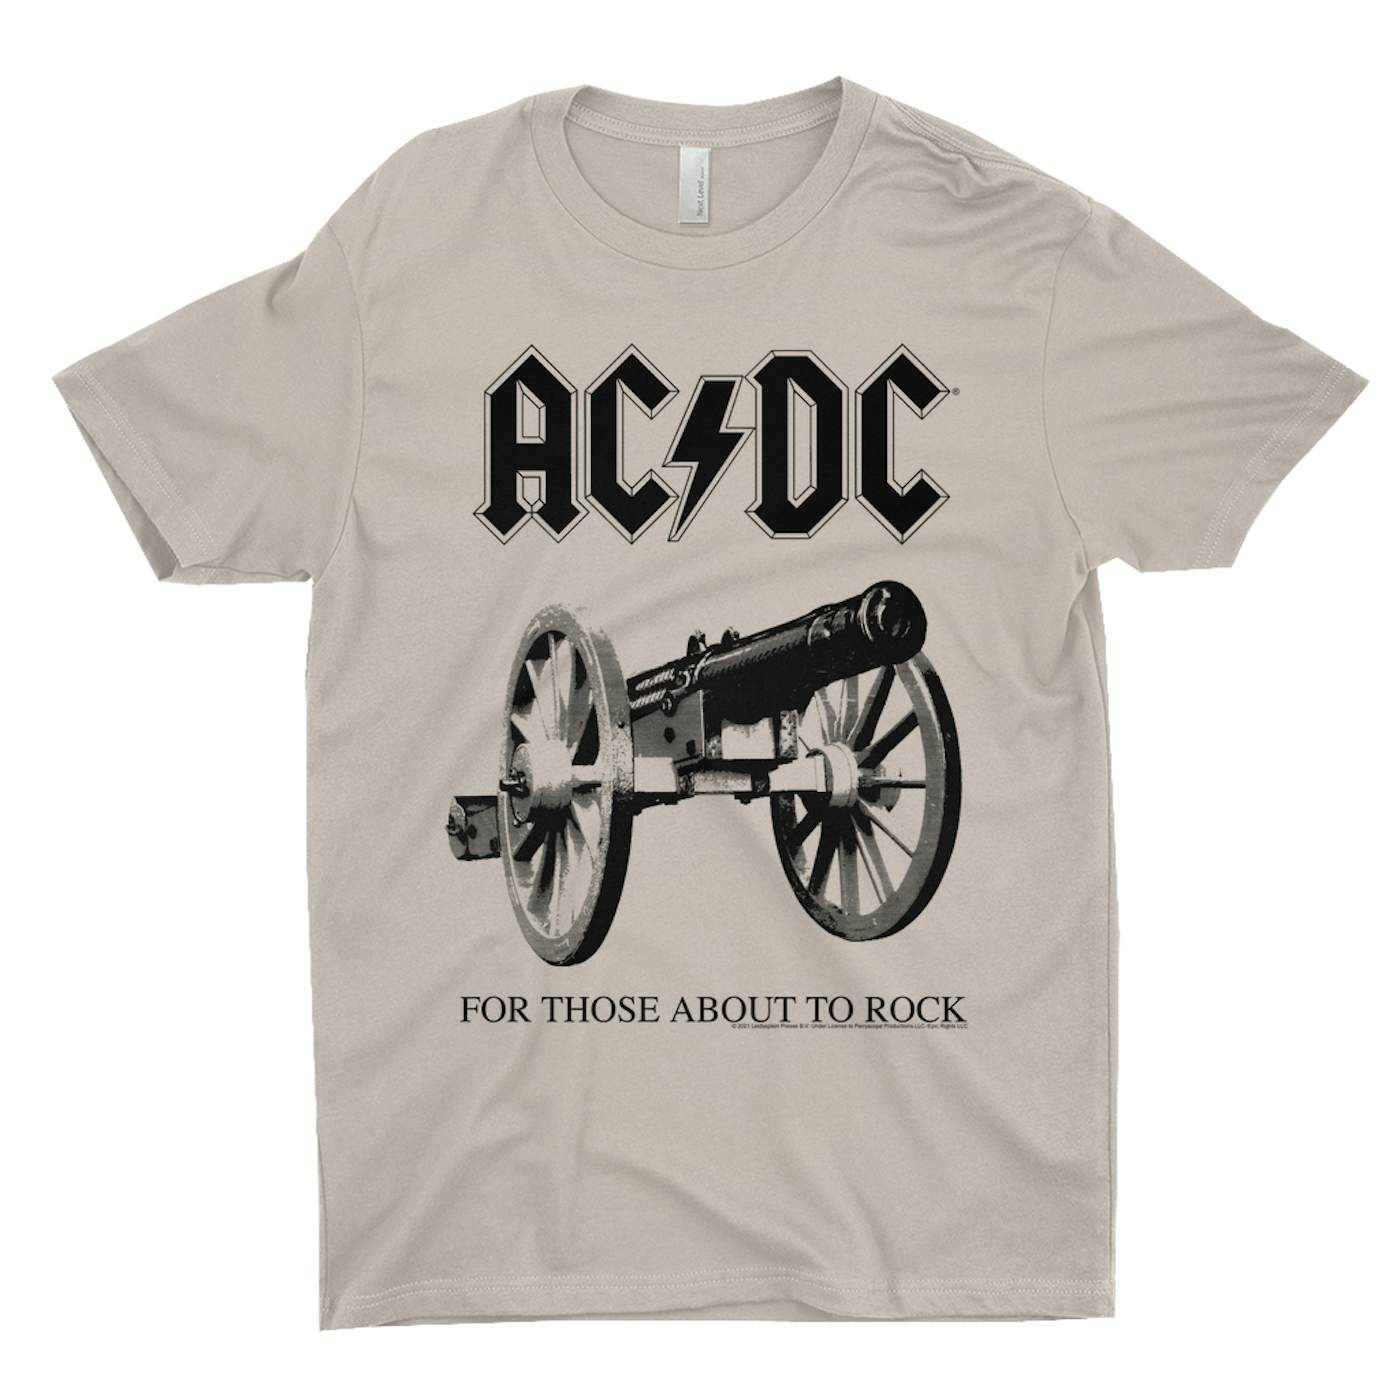 About Image For Those Cannon To AC/DC | Black Shirt T-Shirt Rock